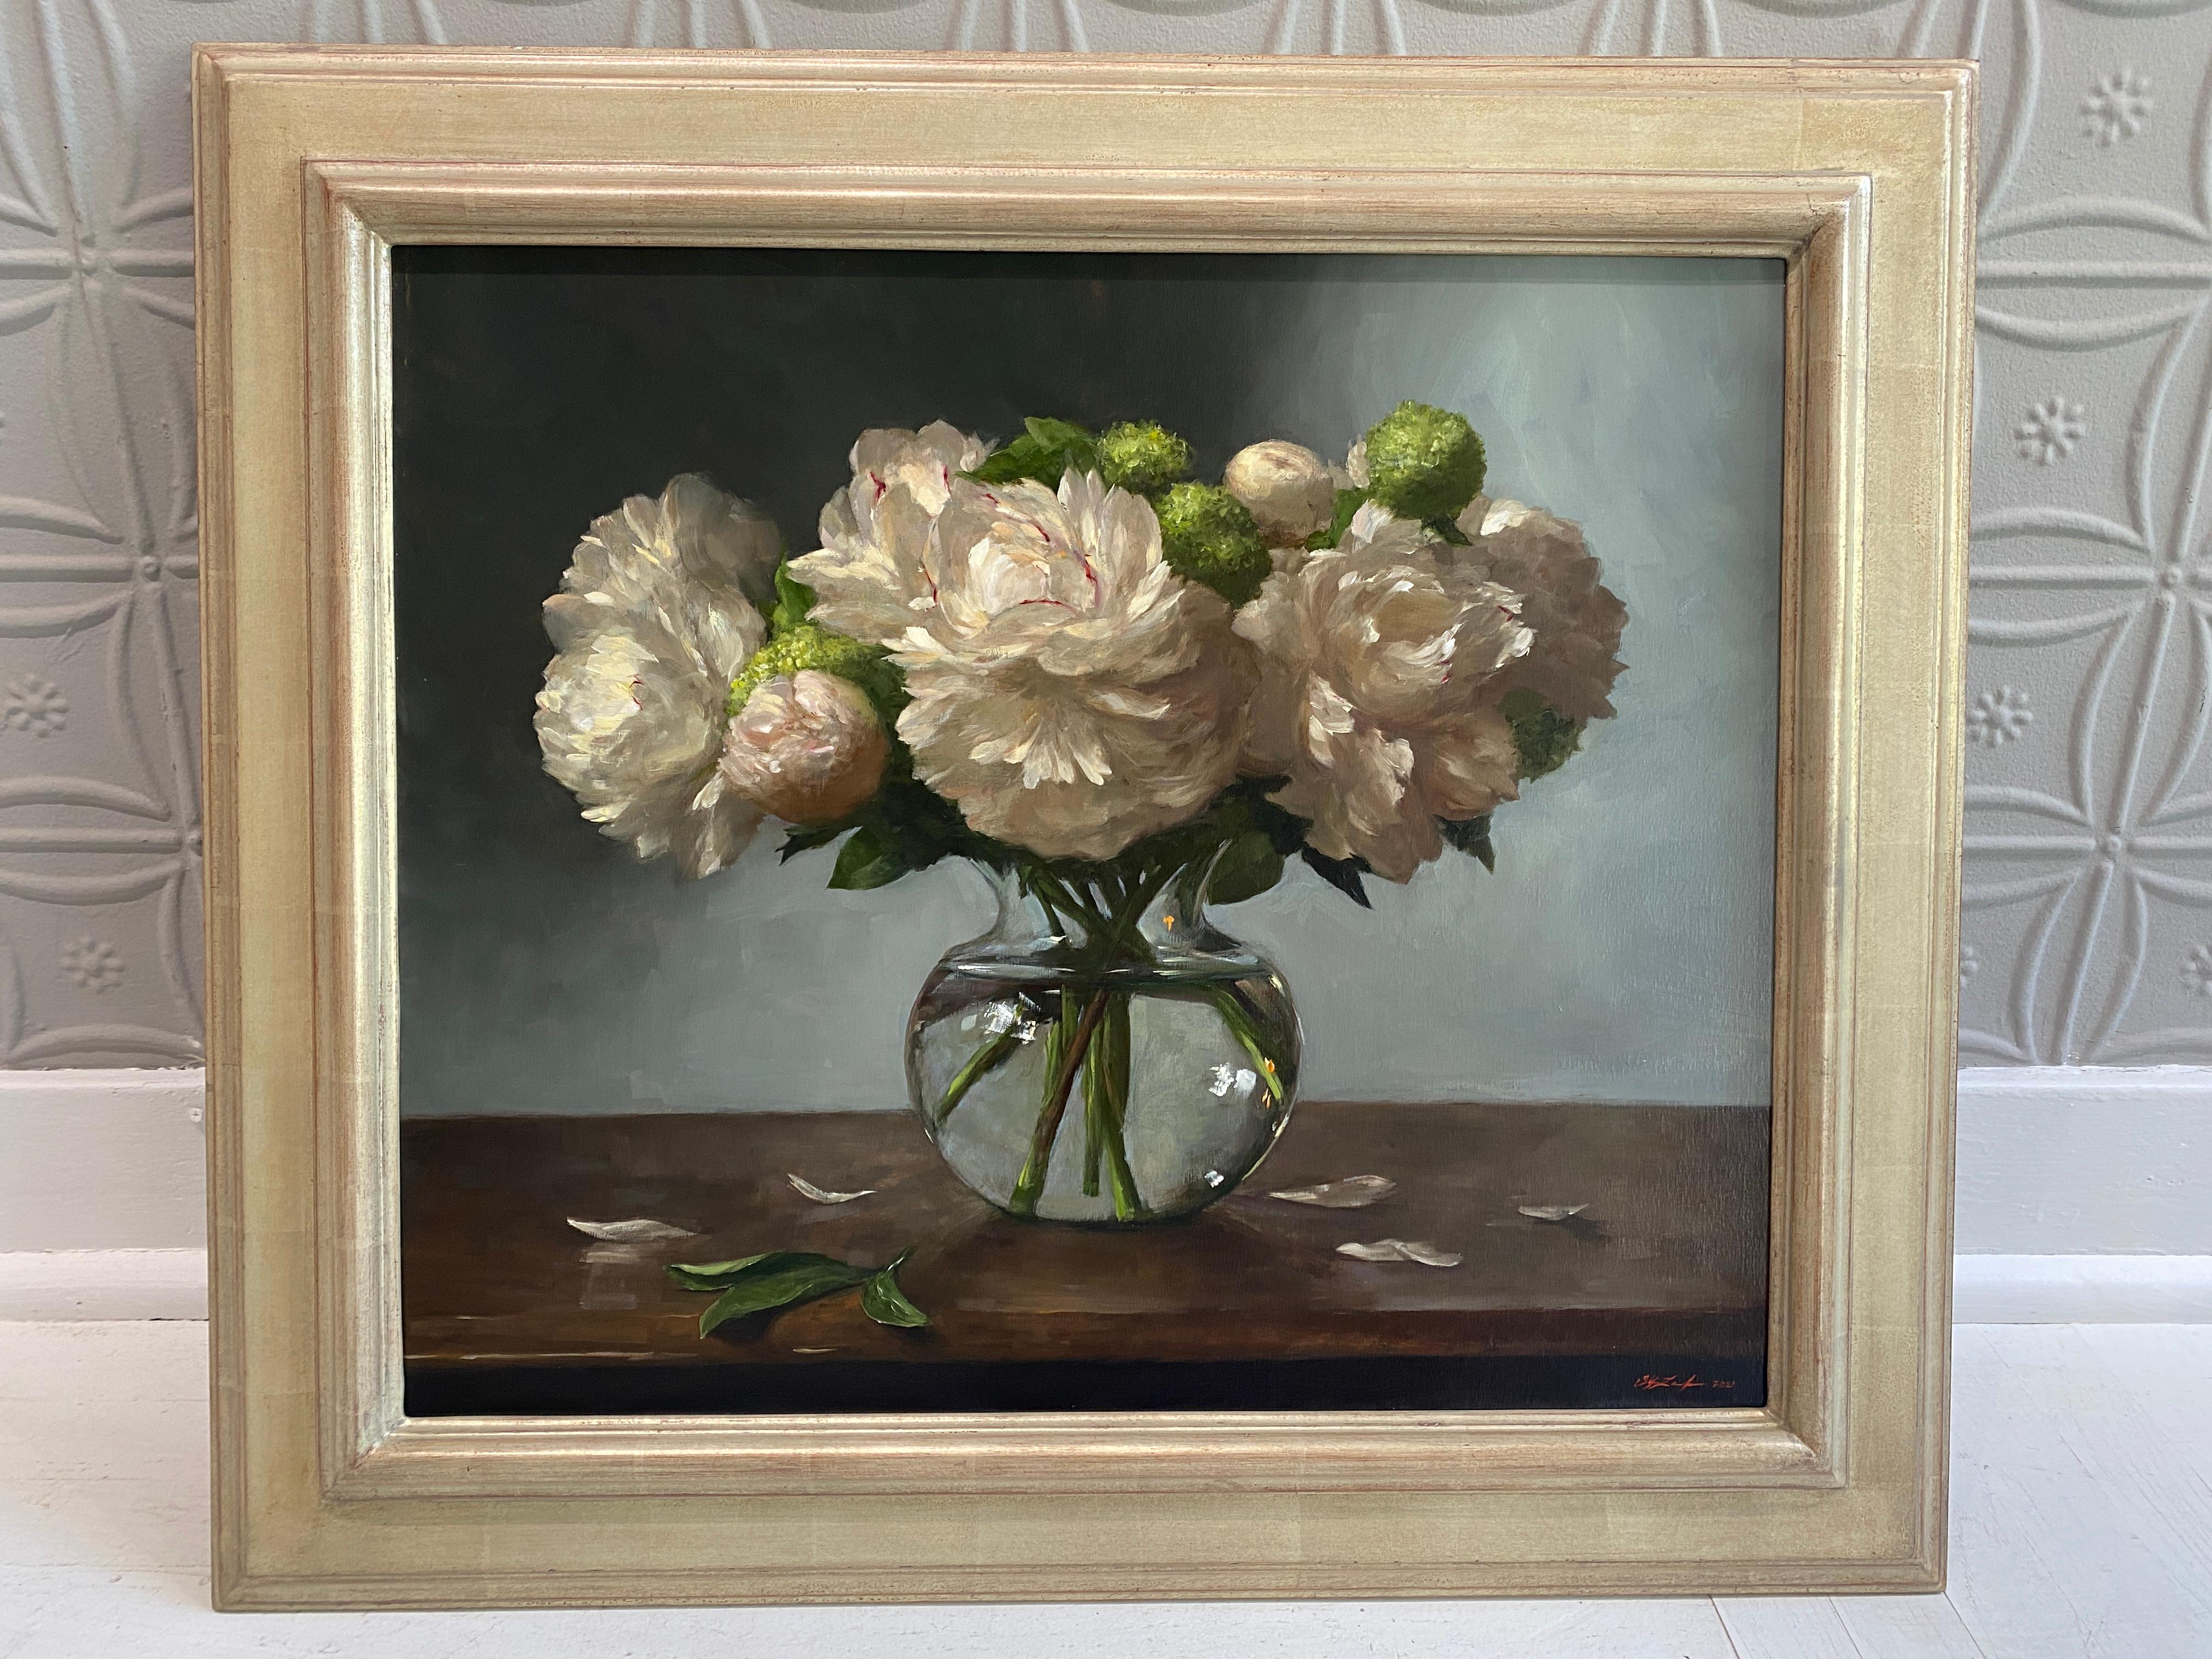 Peonies in Glass Vase - Painting by Sarah Lamb